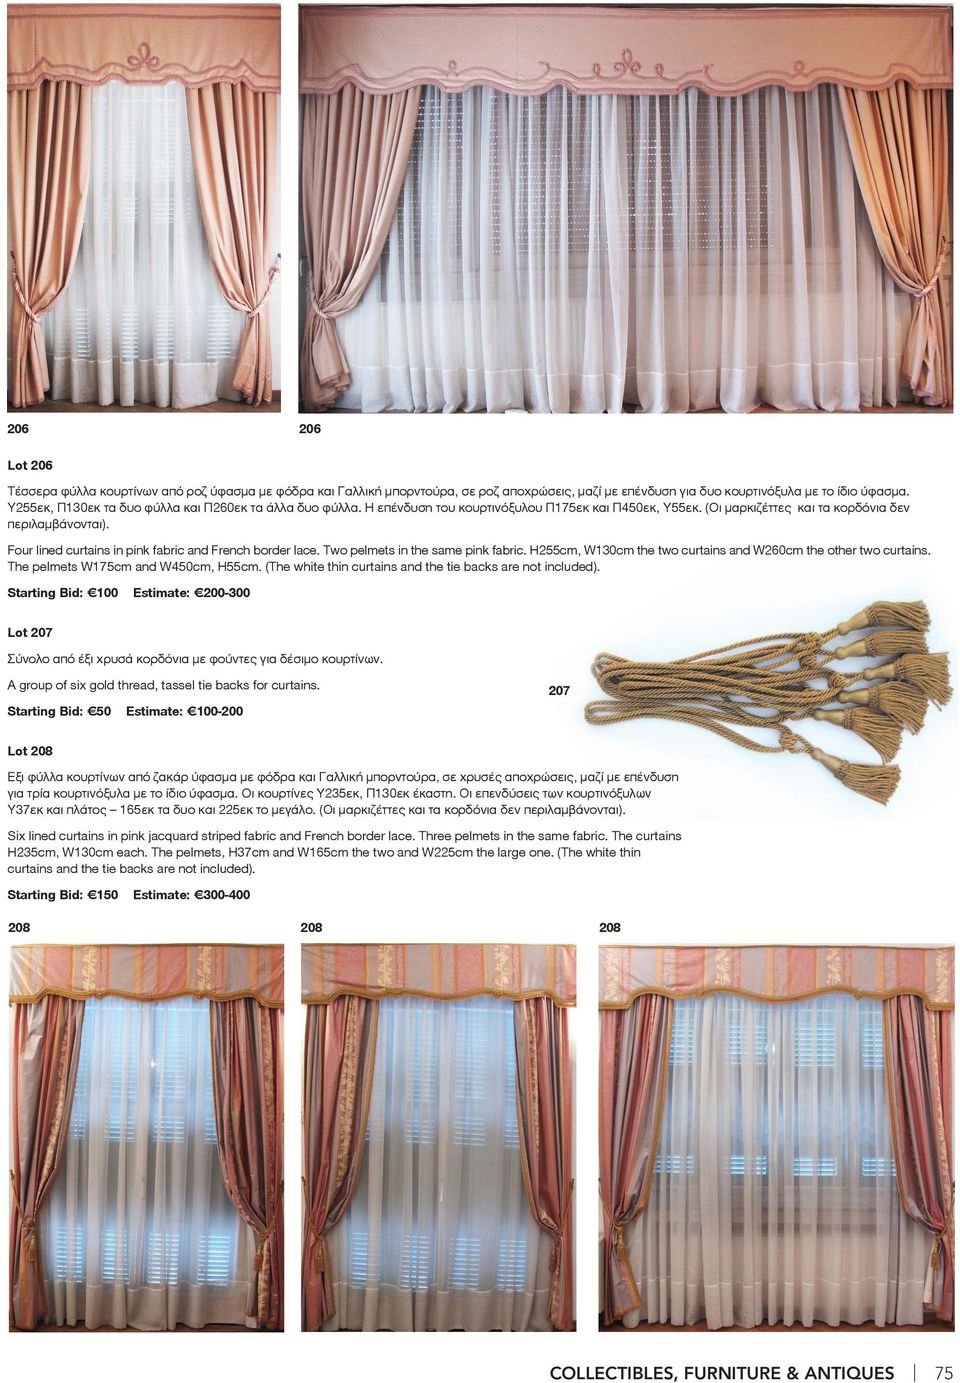 Four lined curtains in pink fabric and French border lace. Two pelmets in the same pink fabric. H255cm, W130cm the two curtains and W260cm the other two curtains. The pelmets W175cm and W450cm, H55cm.